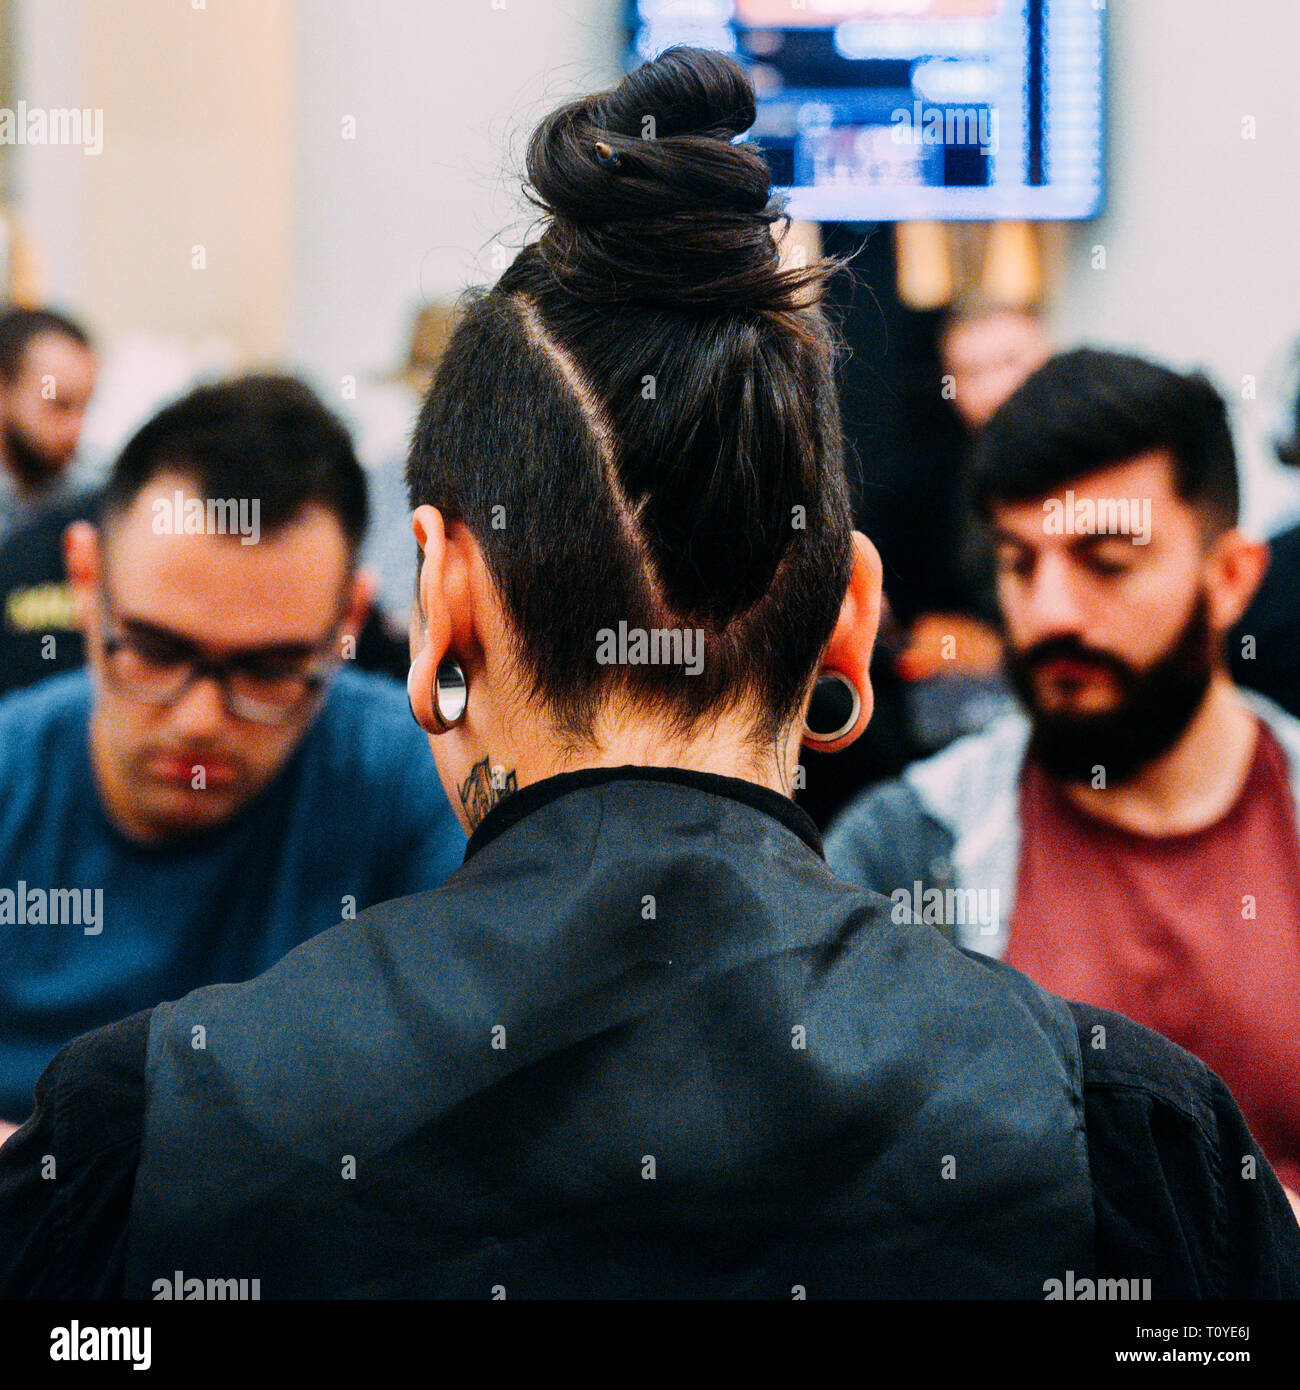 Rio de Janeiro, Brazil - March 21st, 2019: Close up of poker dealer with exotic eerings at the the Main Event of the PartyPoker LIVE MILLIONS South America 2019 occuring at the luxurious Copacabana Palace Belmond Hotel in Rio de Janeiro, Brazil from March 15th through March 24th, 2019. Credit: Alexandre Rotenberg/Alamy Live News Stock Photo